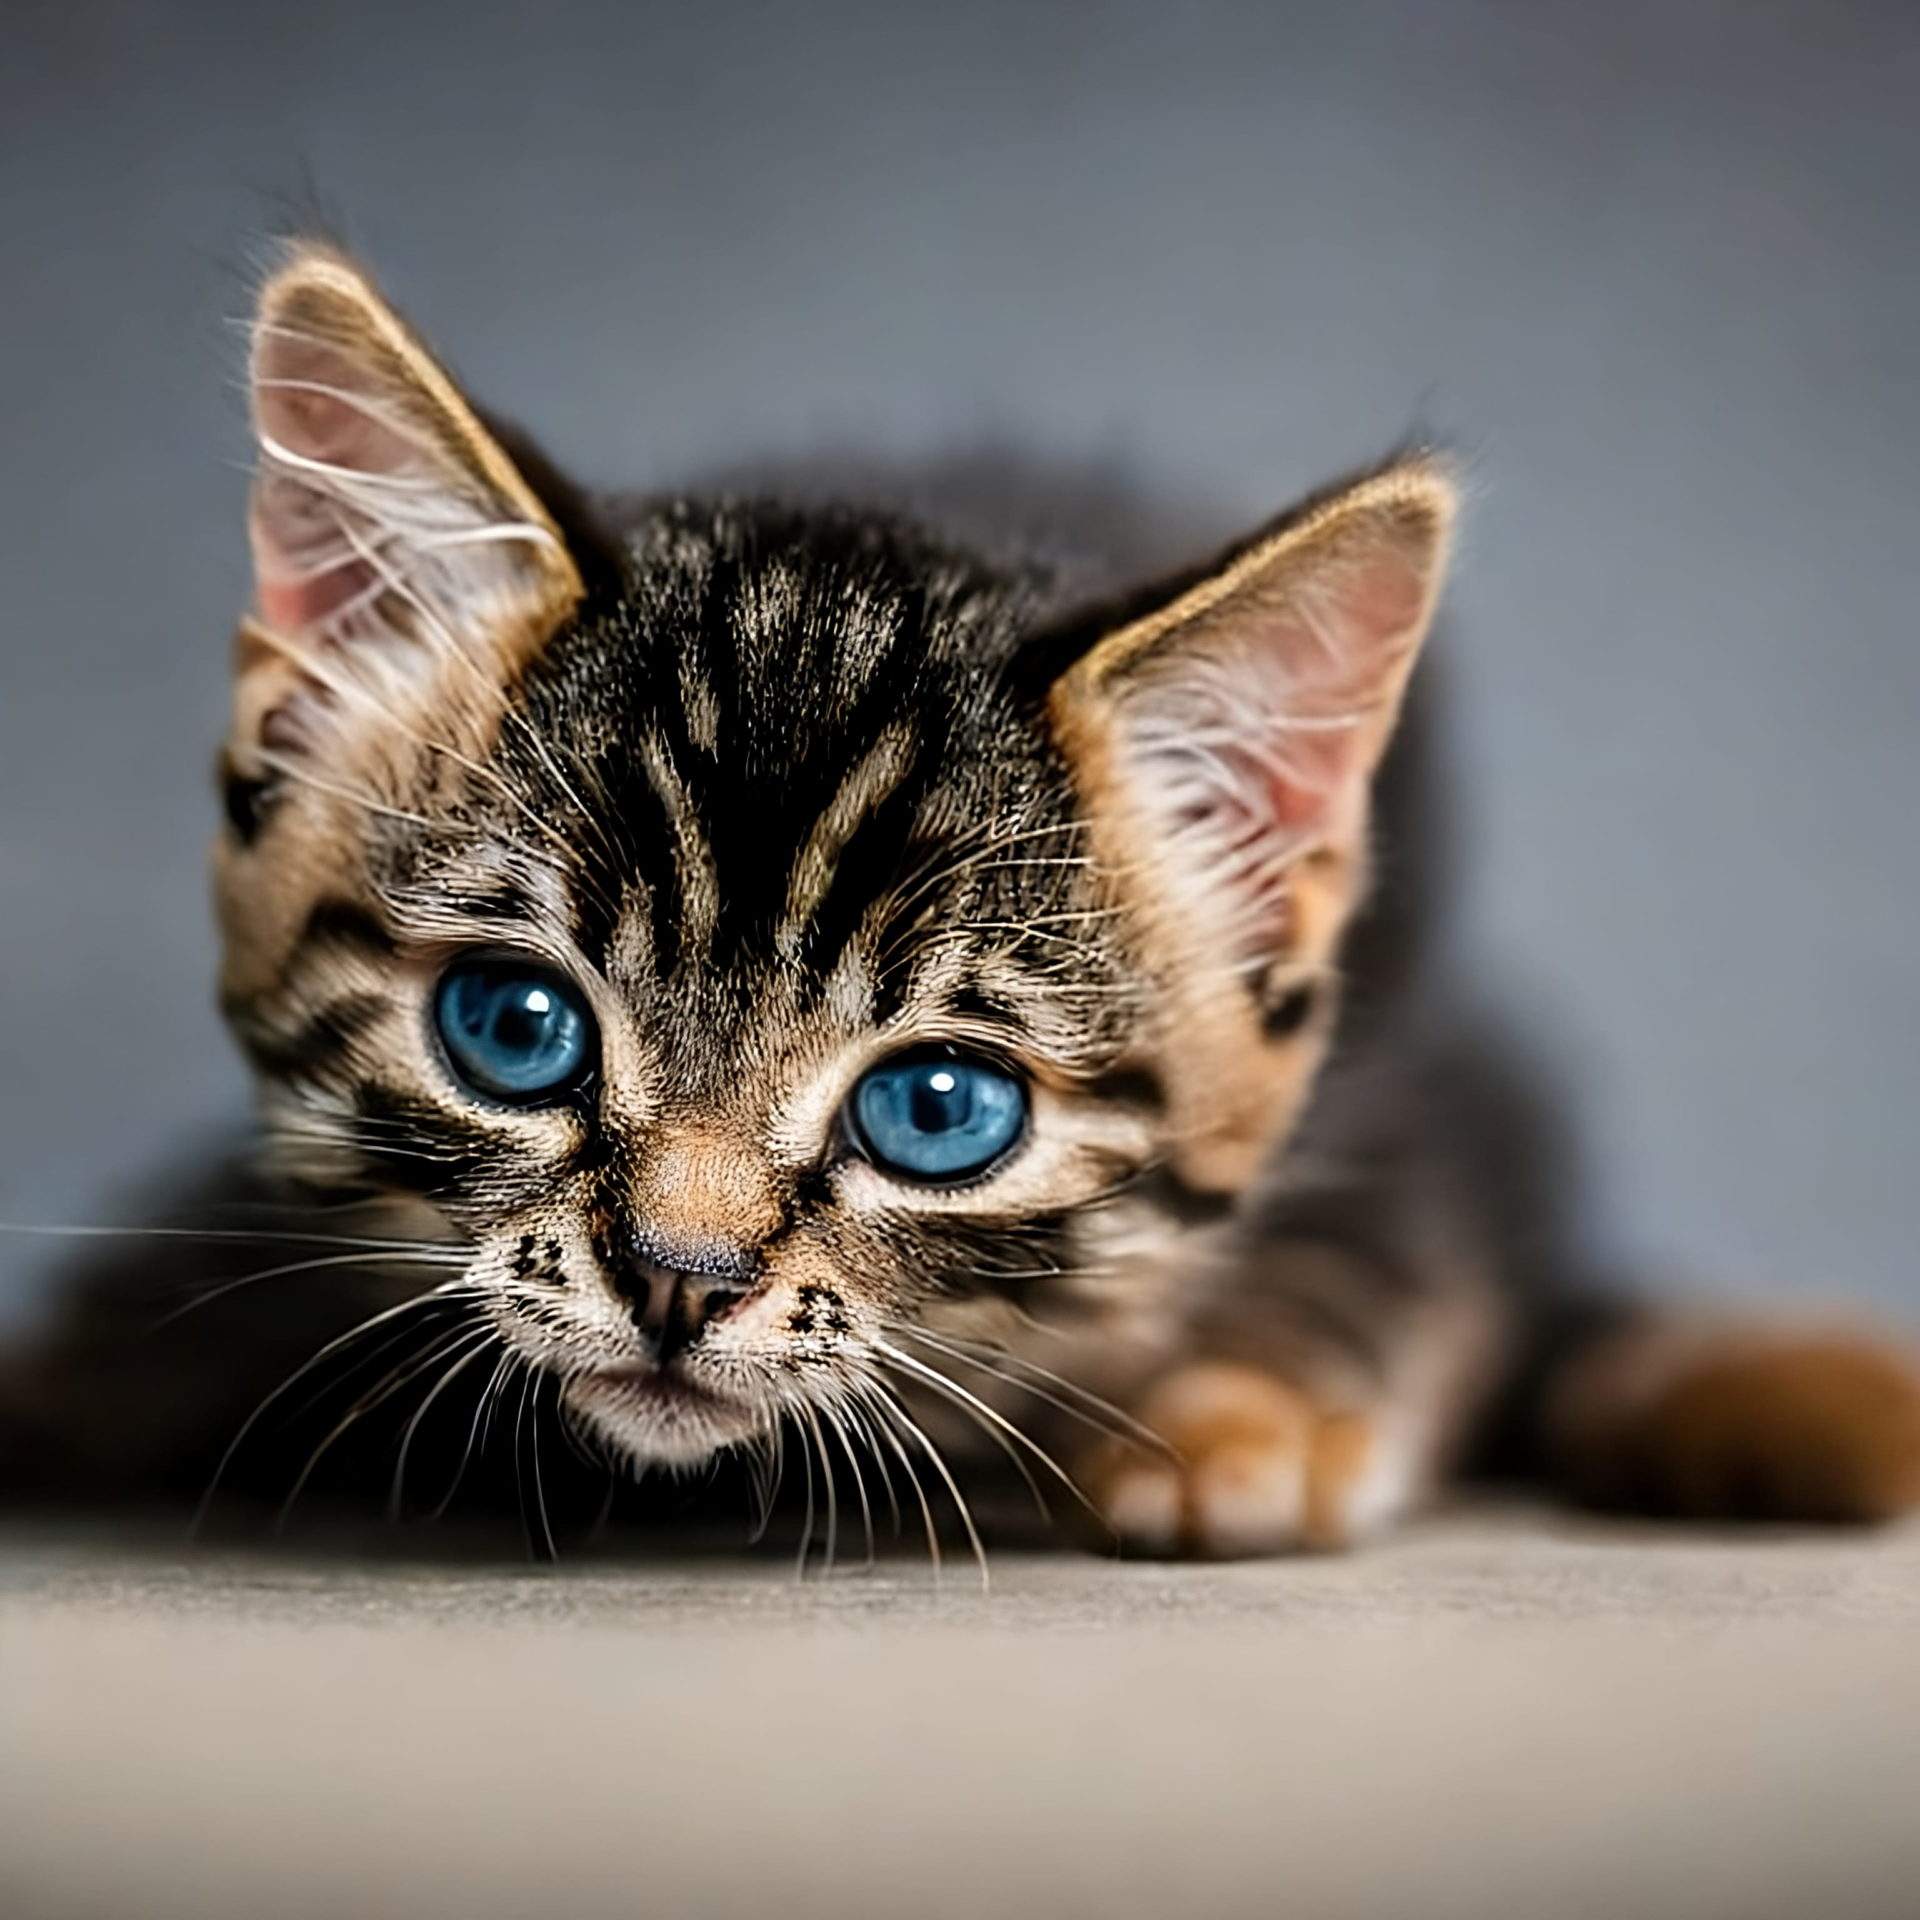 Little cat with huge blue eyes